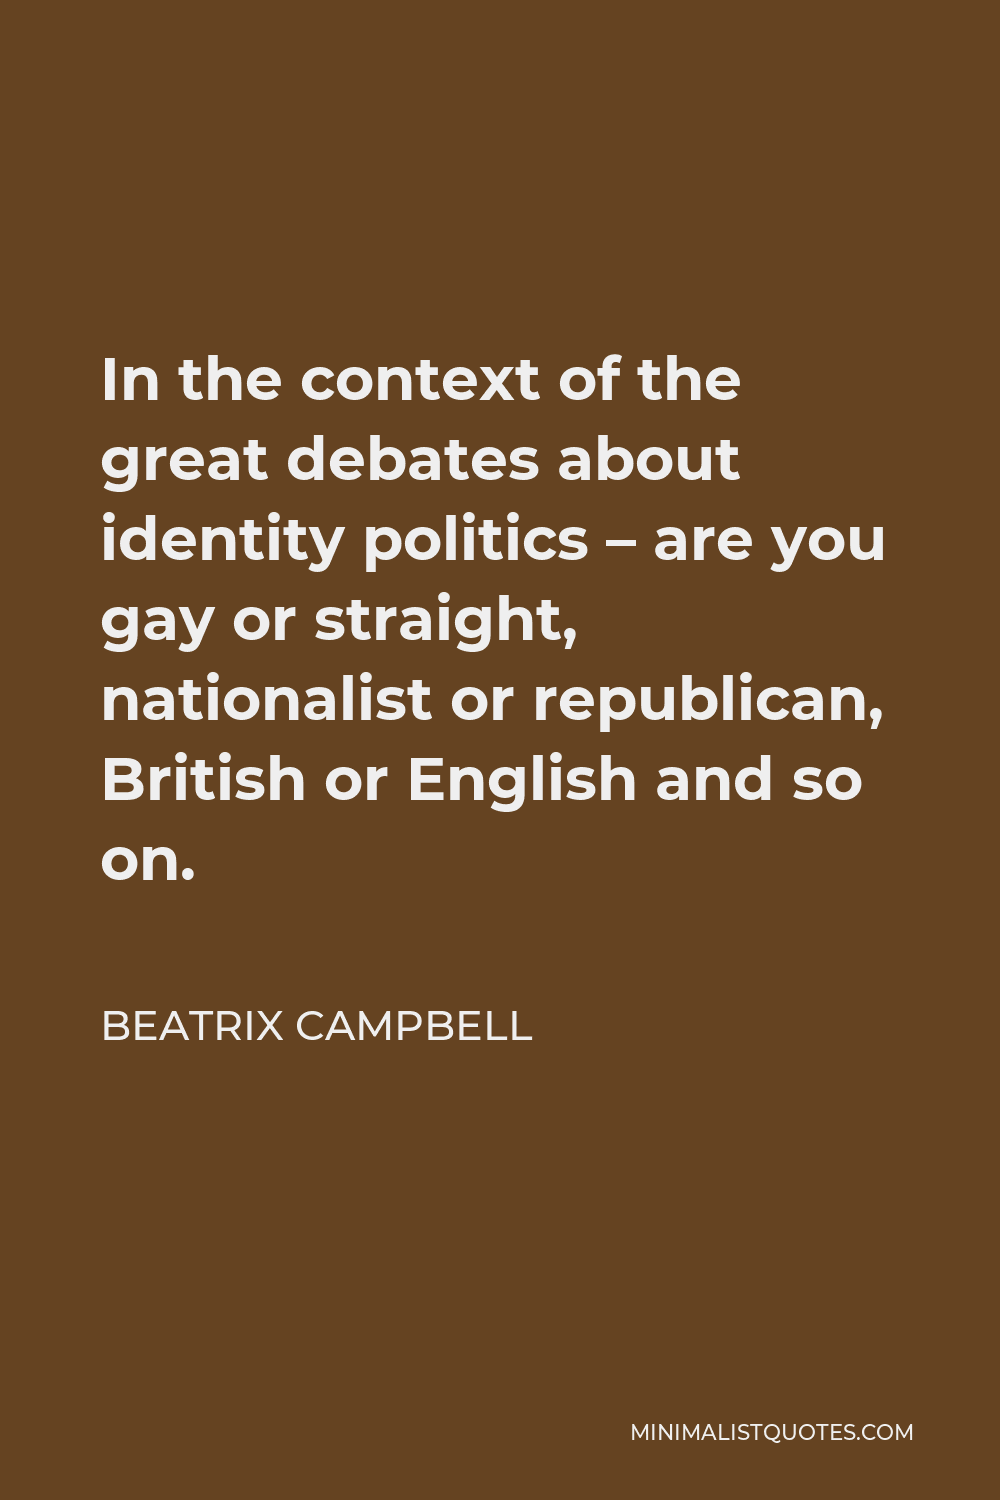 Beatrix Campbell Quote - In the context of the great debates about identity politics – are you gay or straight, nationalist or republican, British or English and so on.